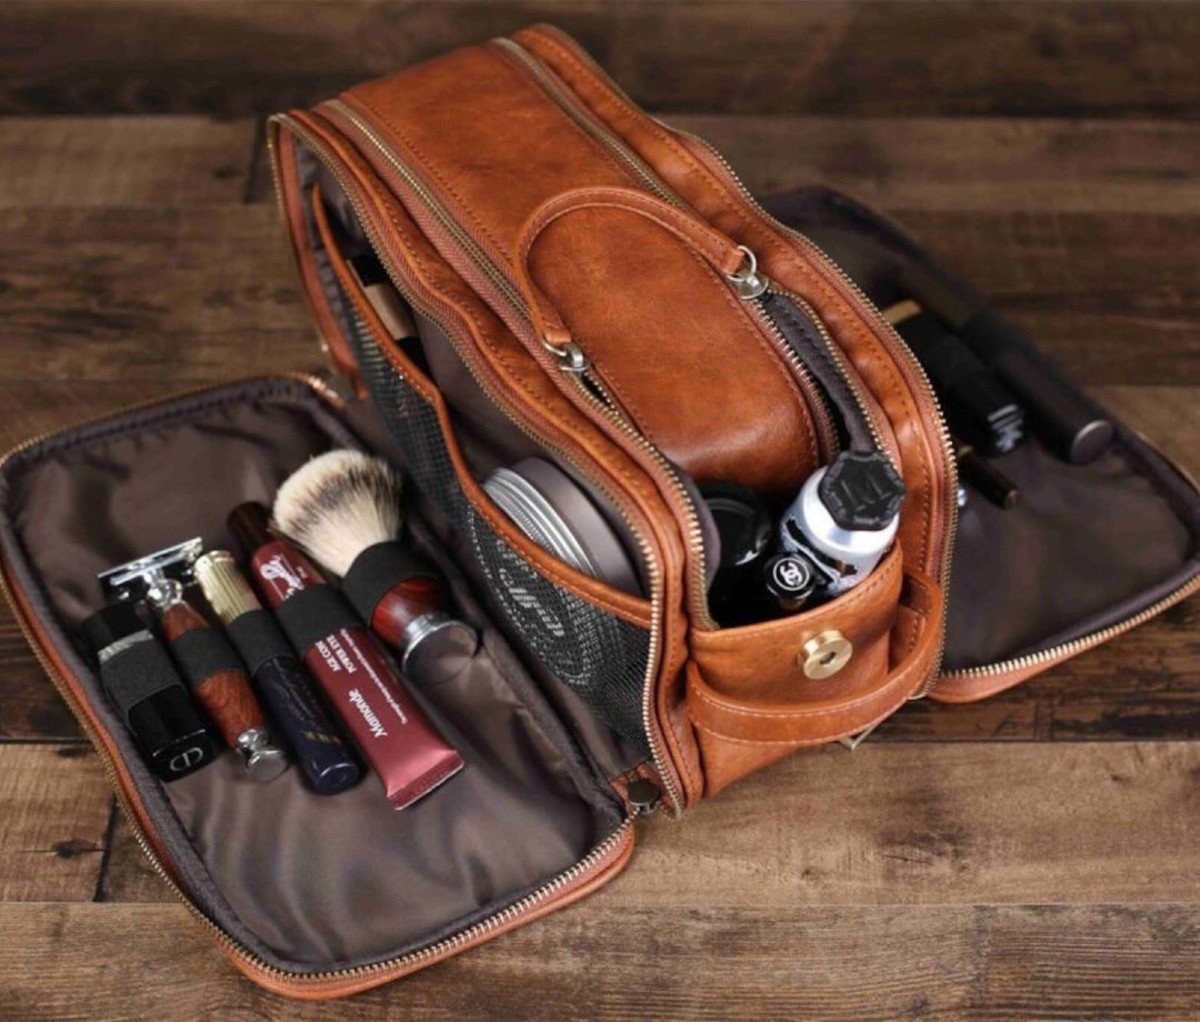 Monogrammed Leather Toiletry Bag